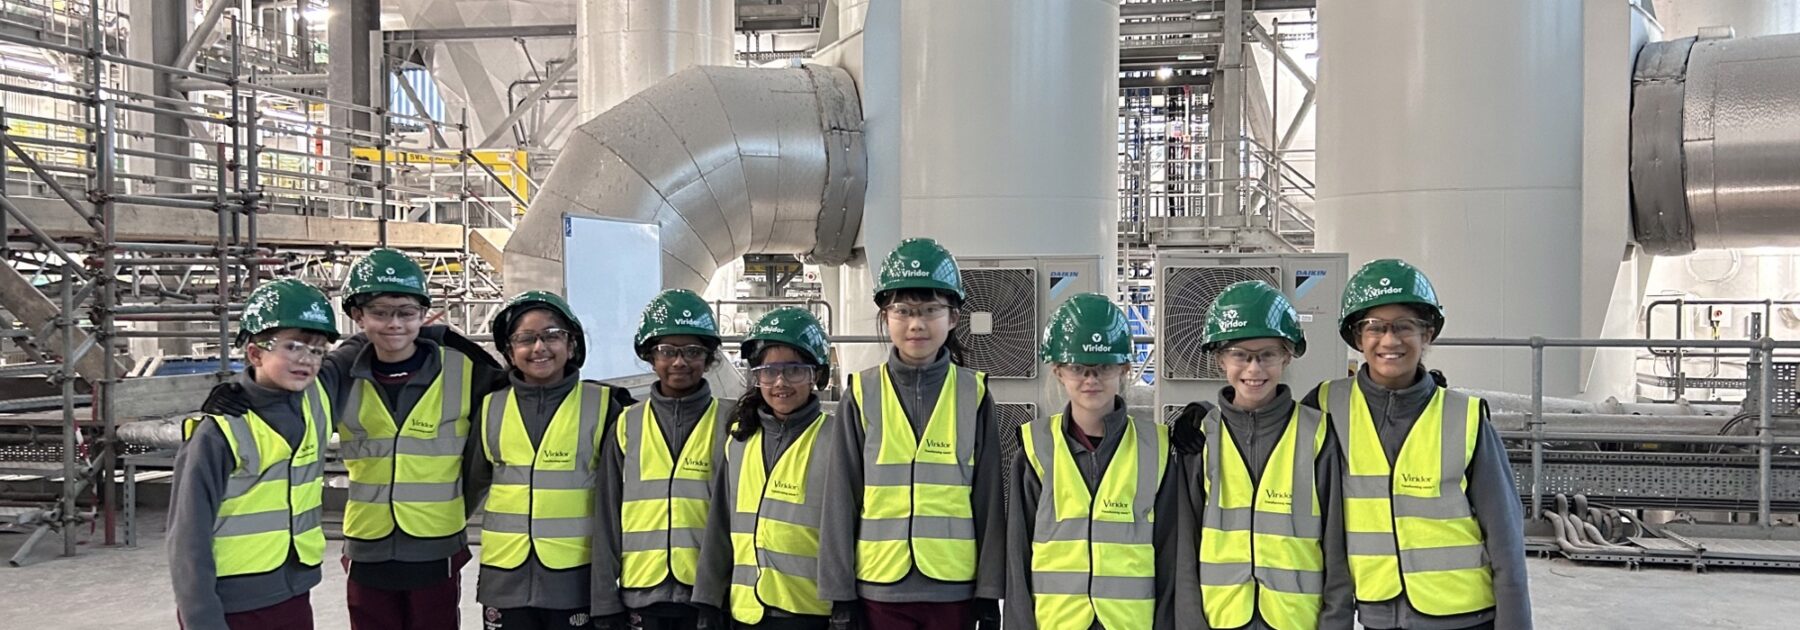 Year 4 Global studies head to Beddington Energy Recovery Facility